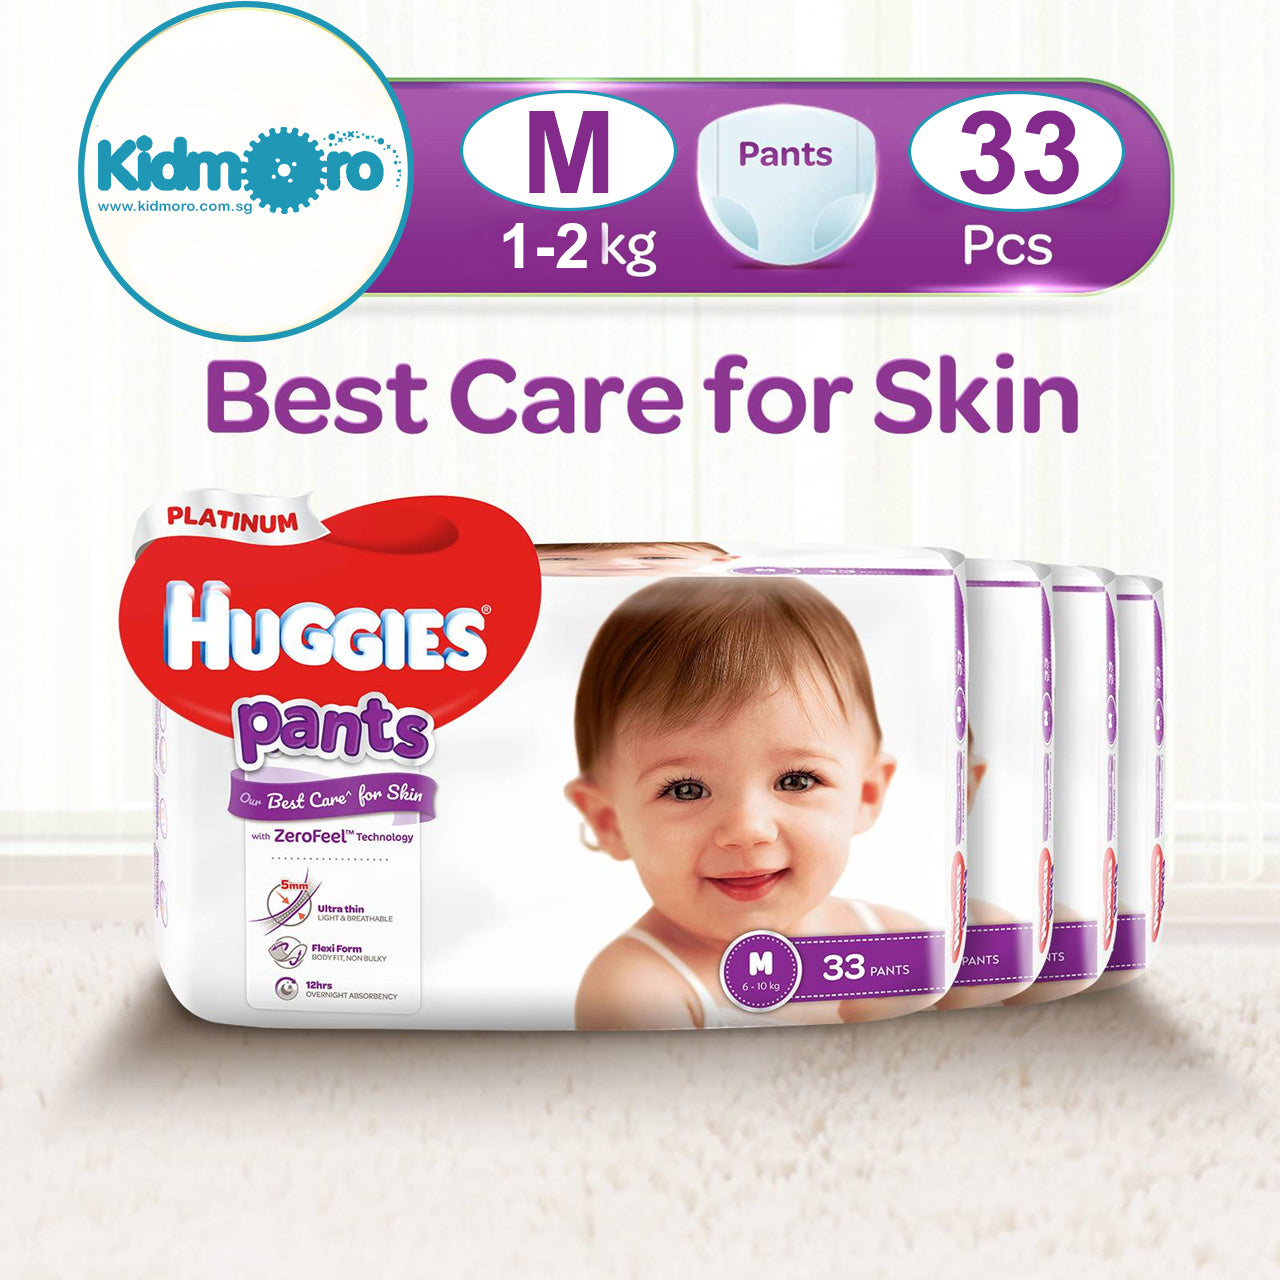 Huggies Dry Pants Eco Pack XL 26s  Fisher Supermarket PH